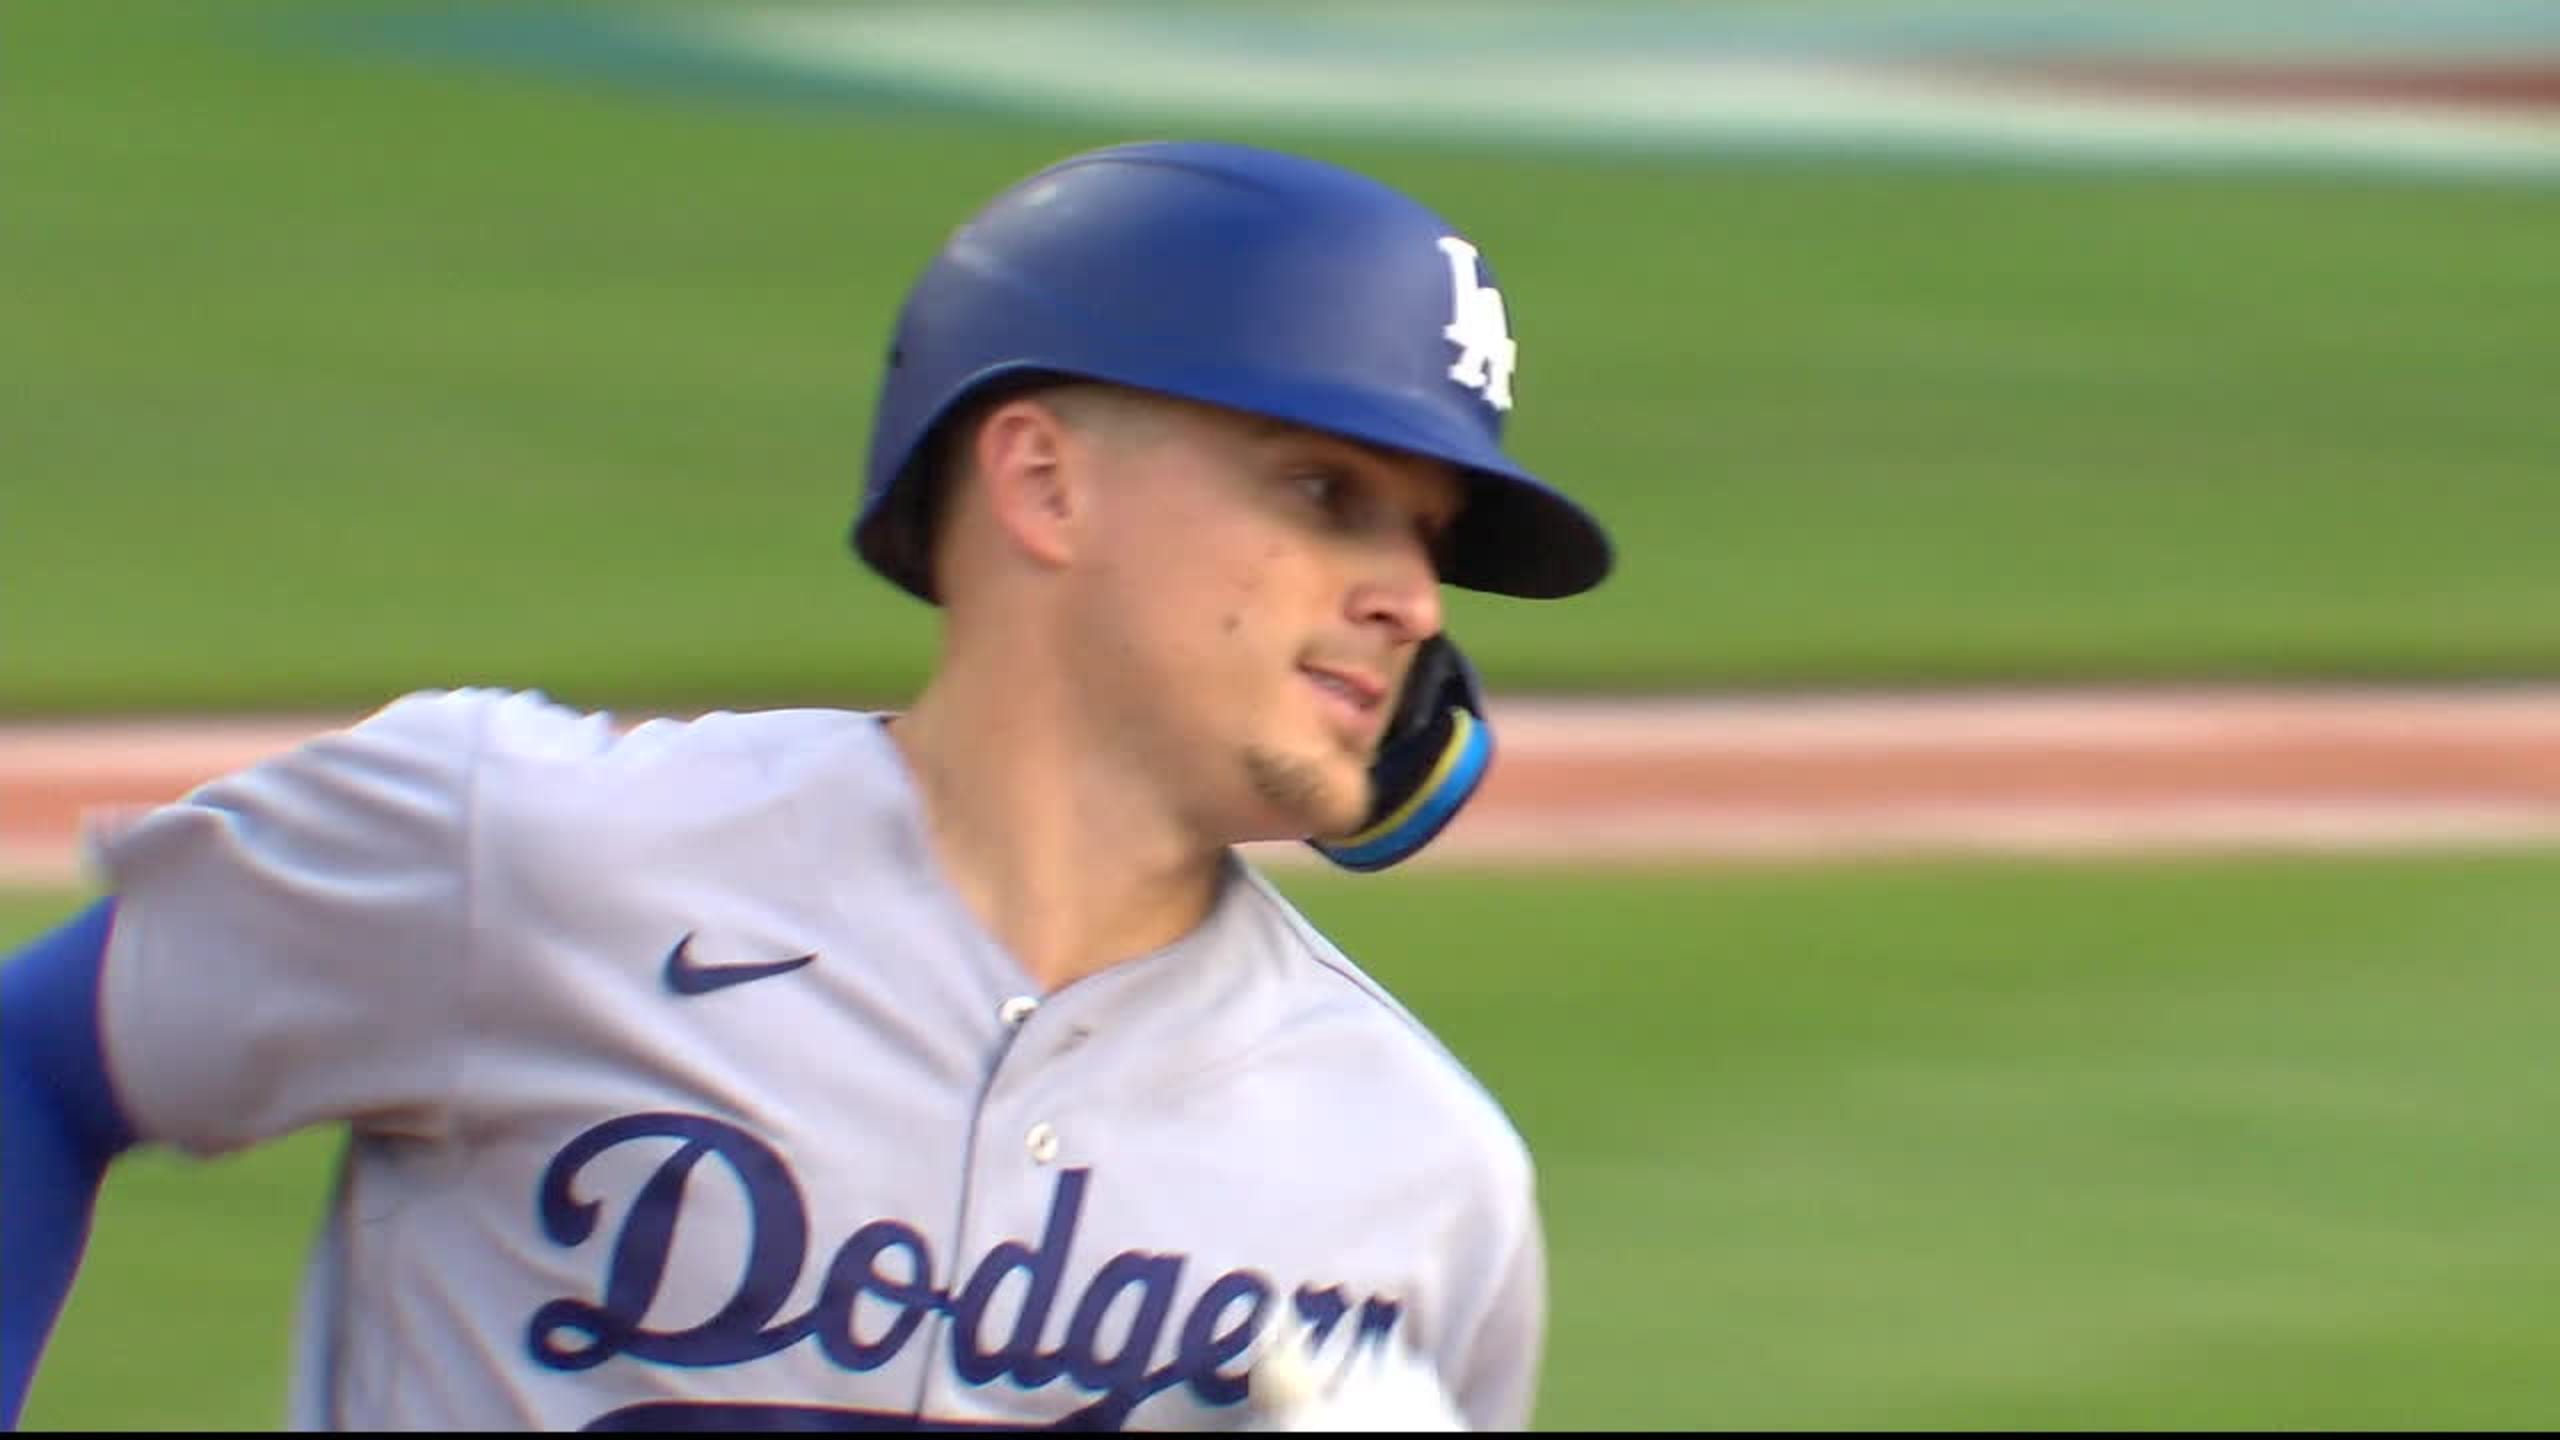 Dodgers 9, Guardians 3 Michael Buschs first career homer helps power Dodgers to 7 straight series wins